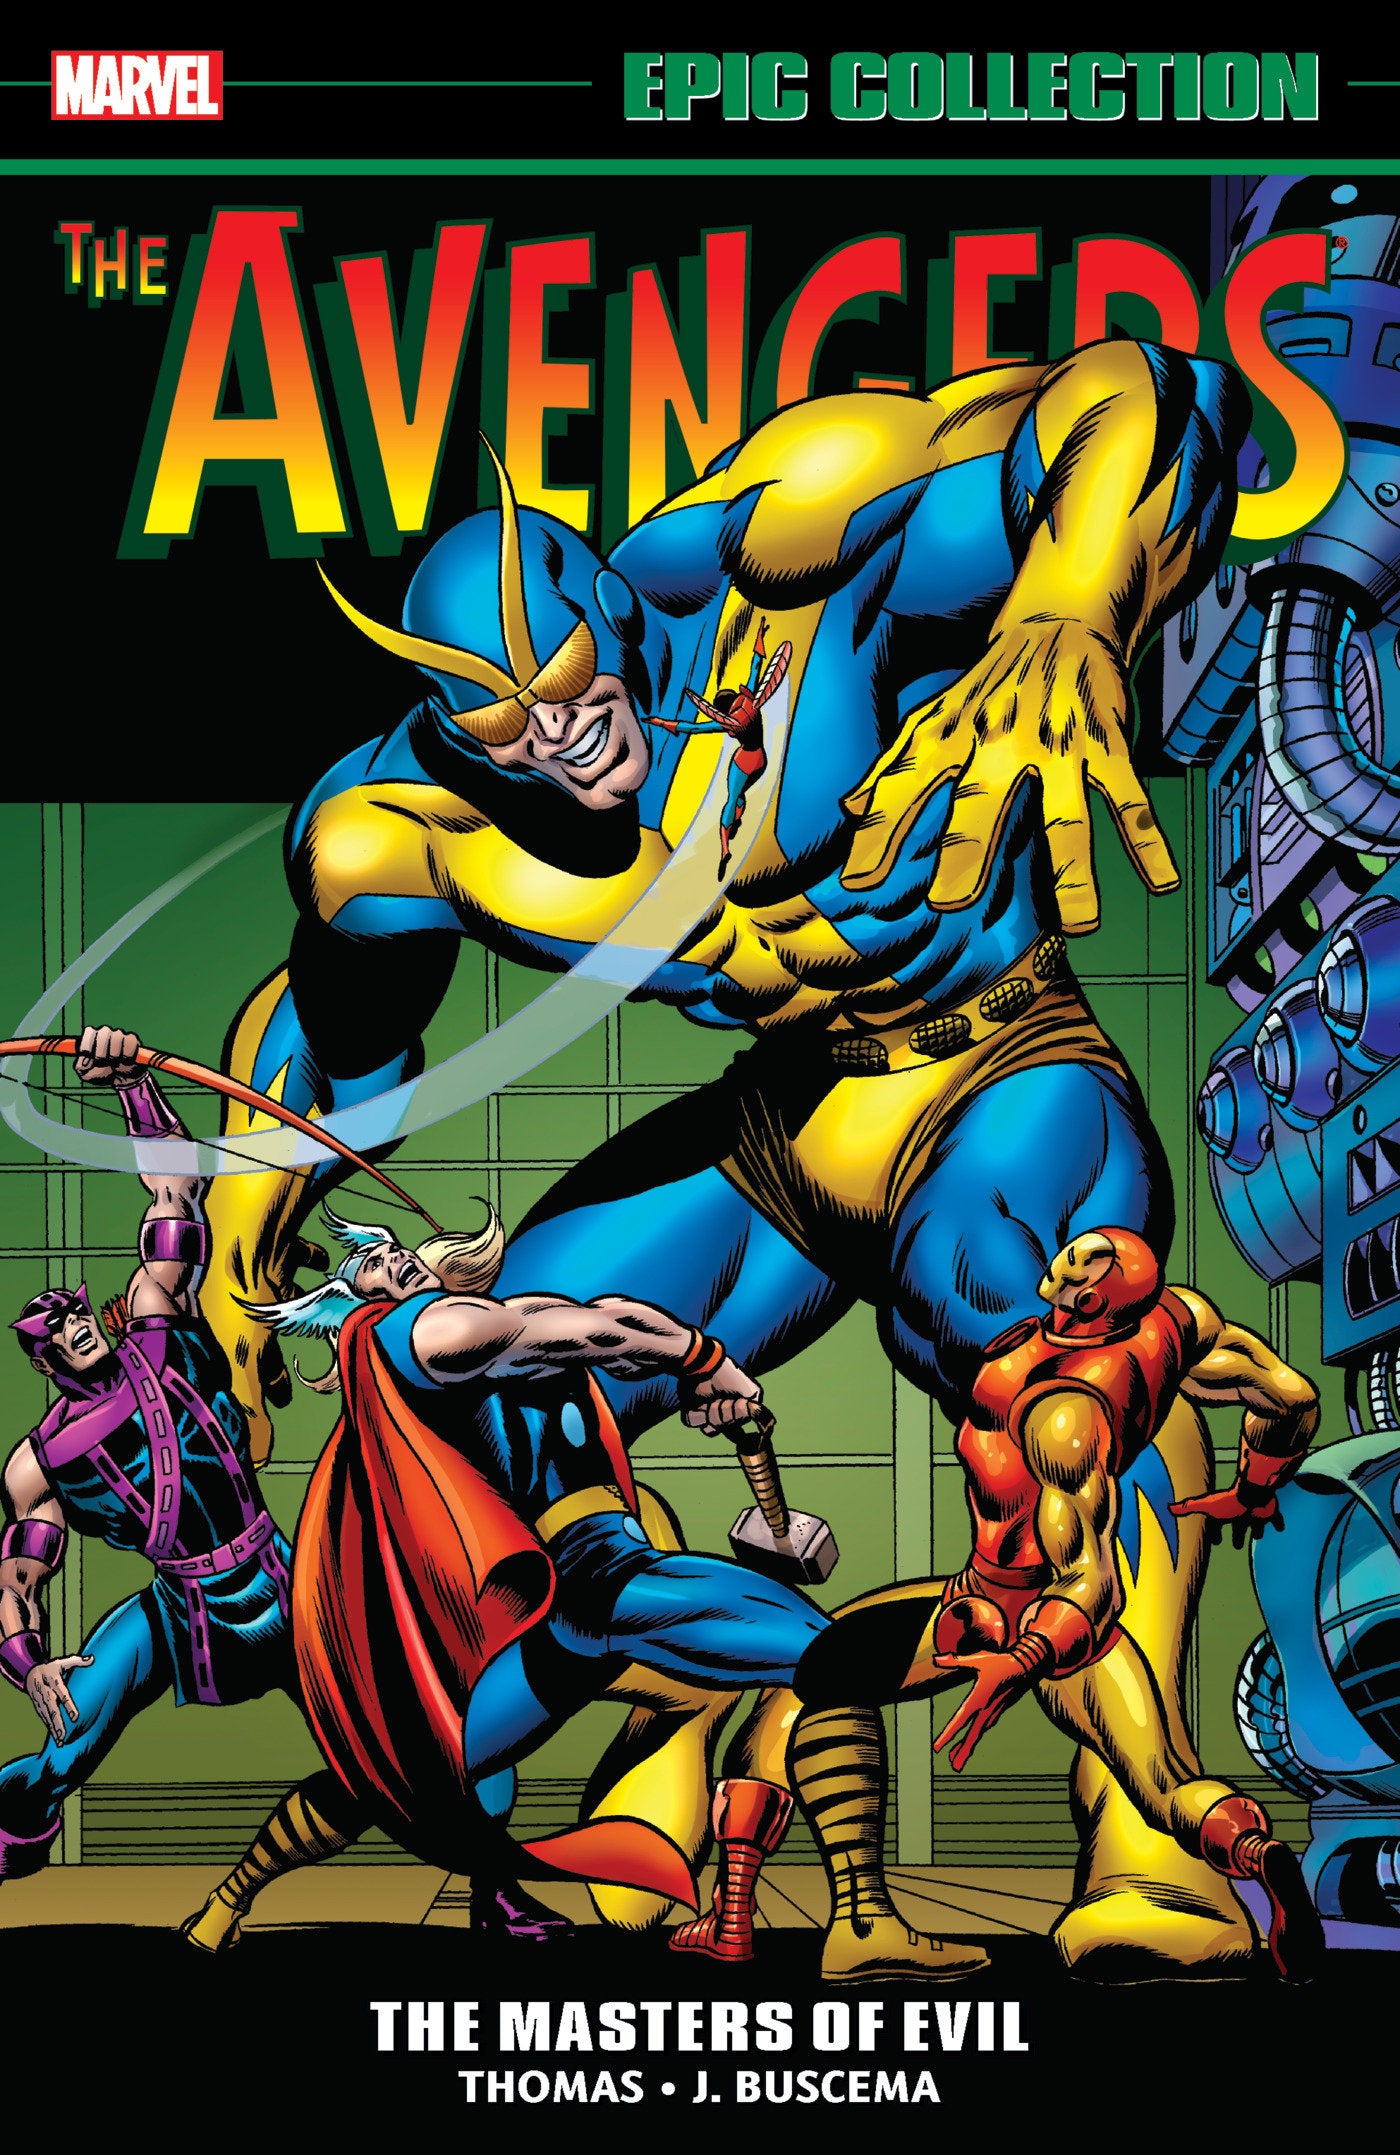 AVENGERS EPIC COLLECTION: MASTERS OF EVIL TRADE PAPERBACK